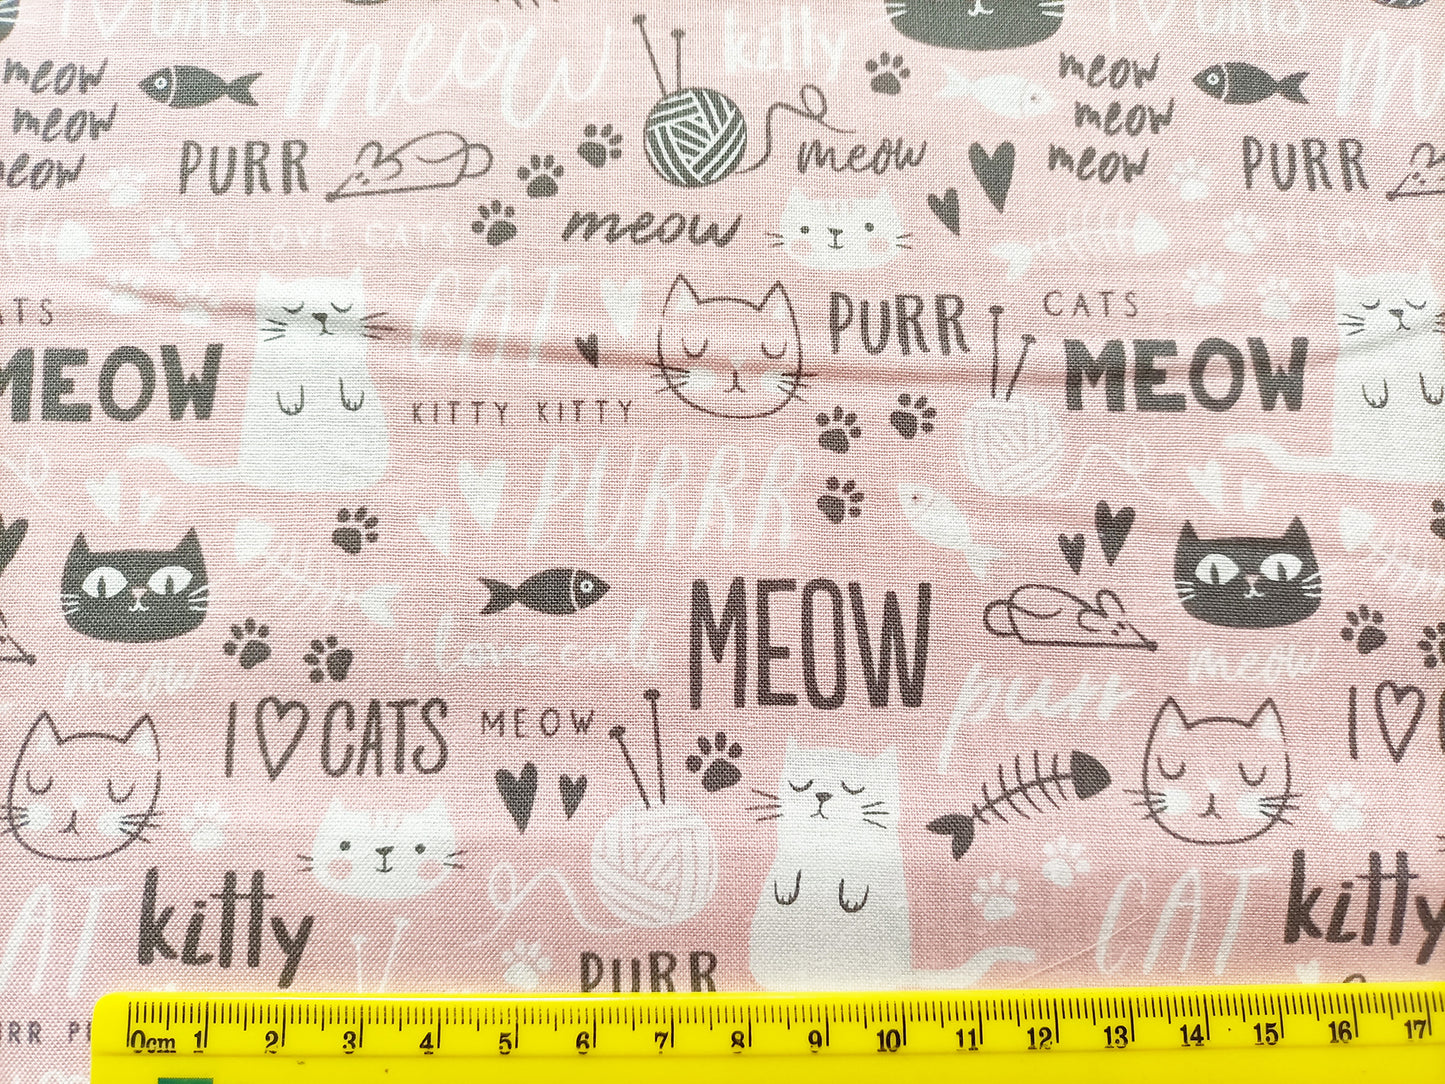 Cotton Fabric - Purrfect Day Pink with Text - My Mind's Eye - Riley Blake